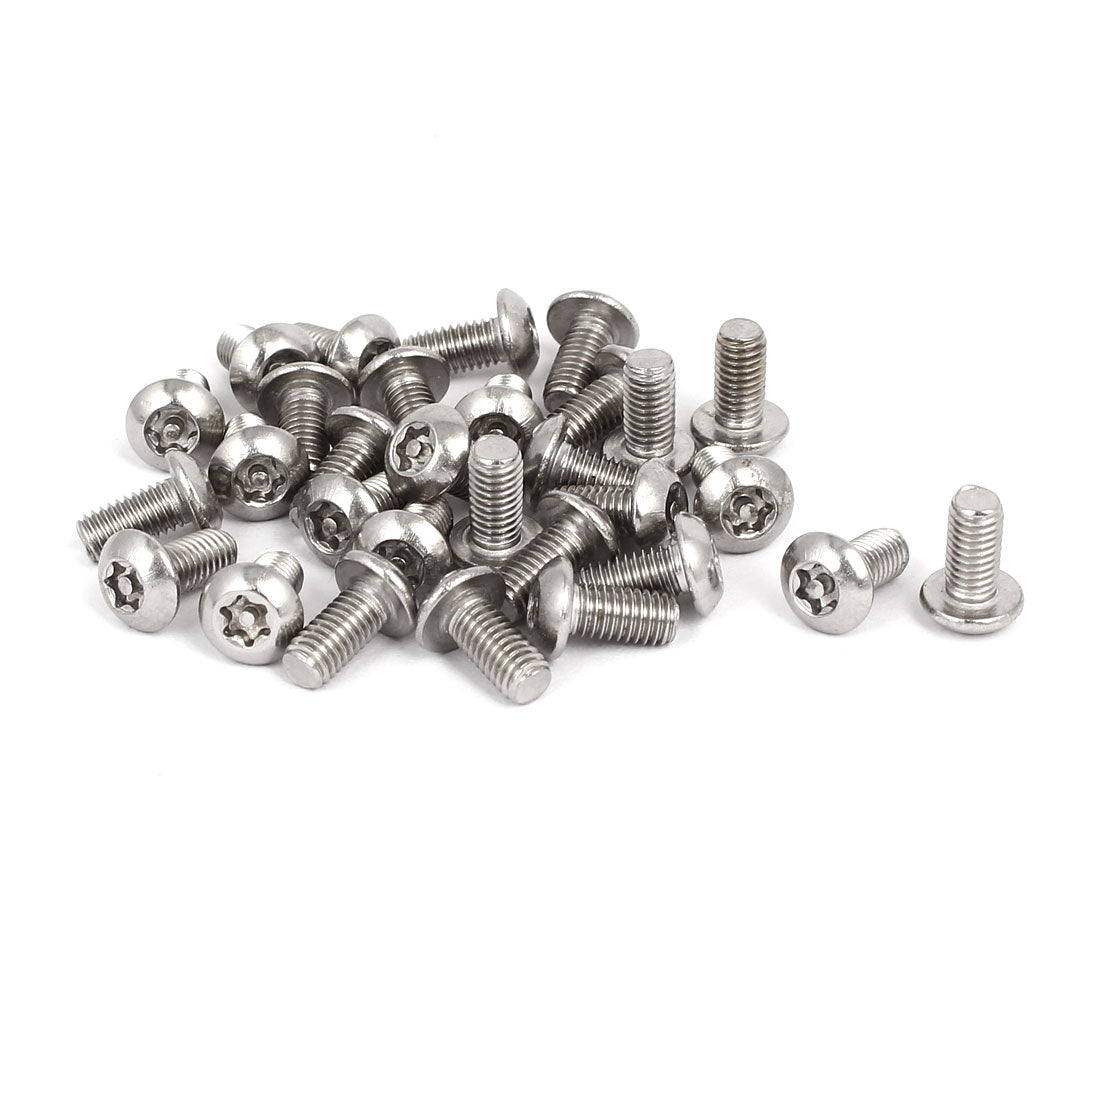 uxcell Uxcell M5x10mm 304 Stainless Steel Button Head Torx Security Tamper Proof Screws 30pcs